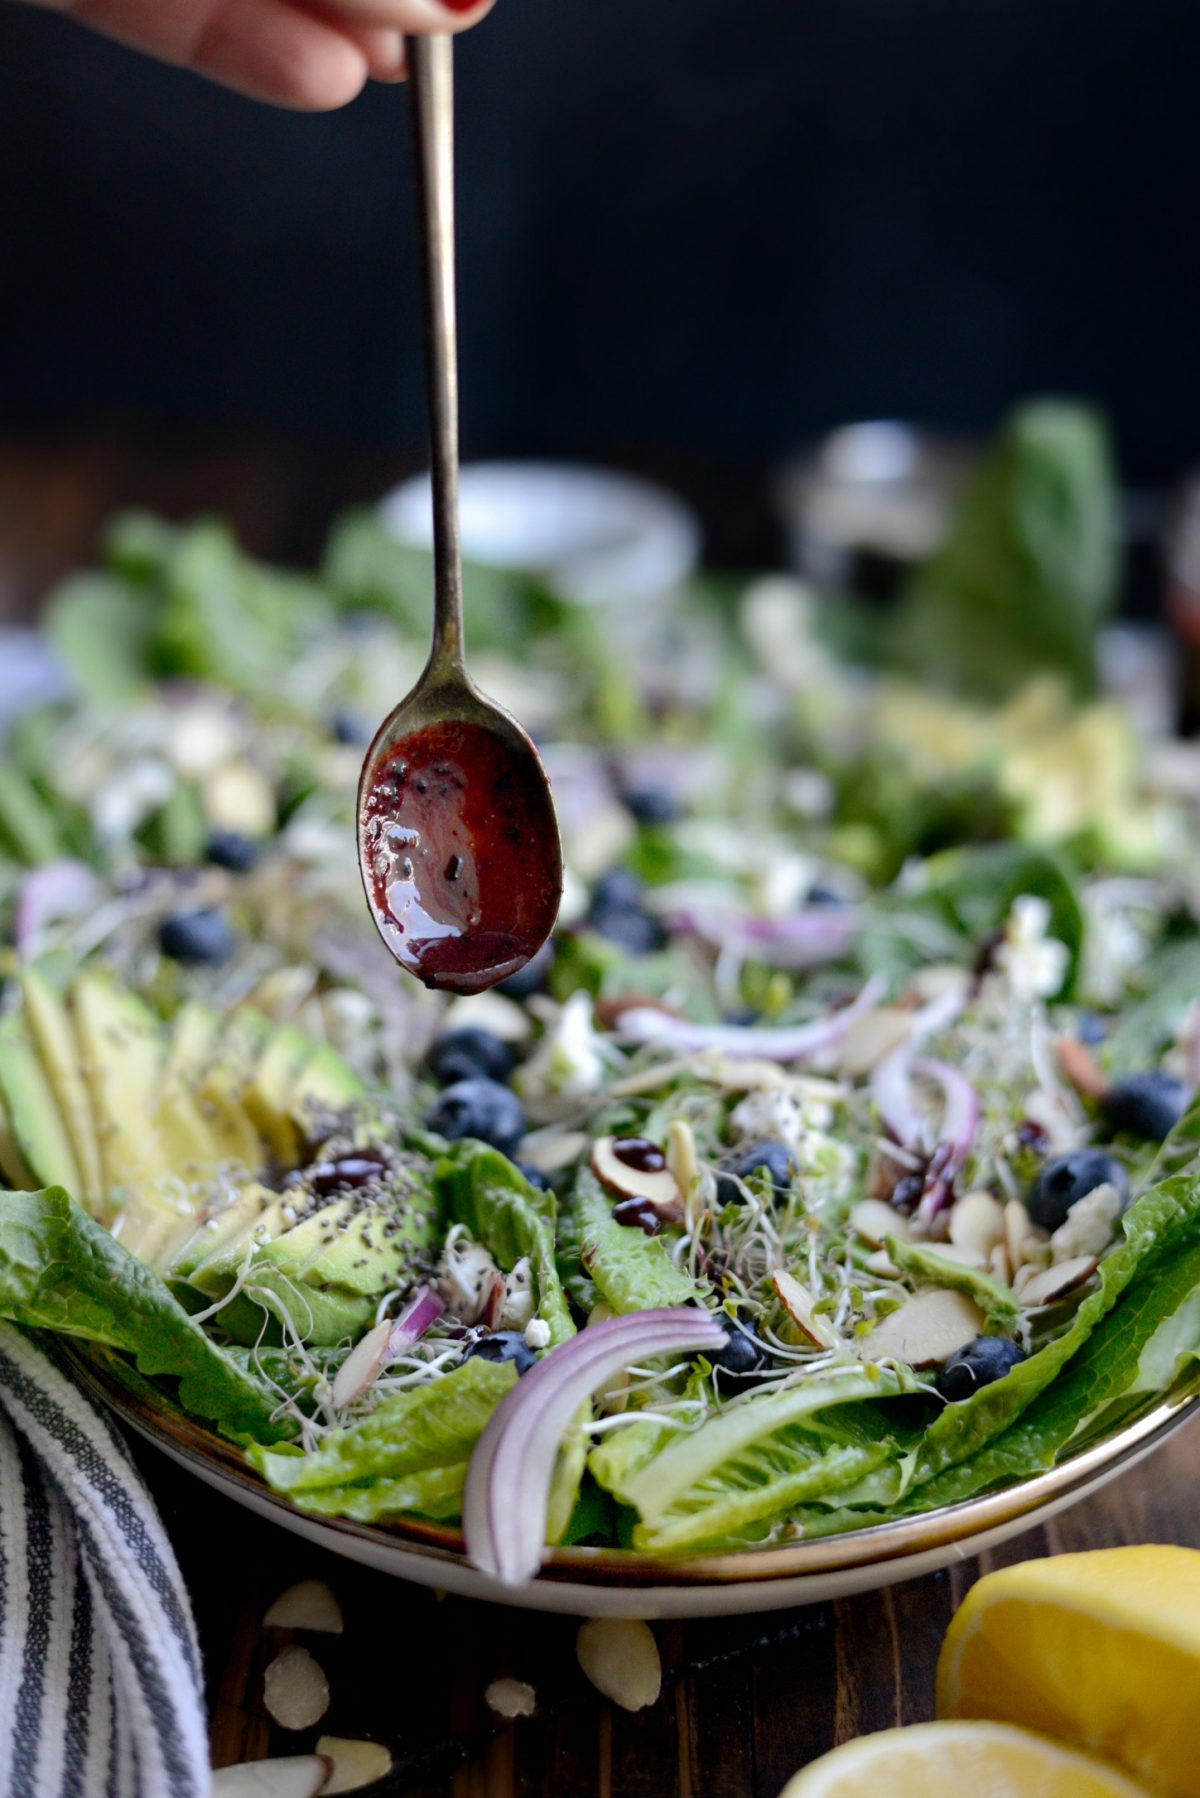 drizzle with blueberry balsamic dressing